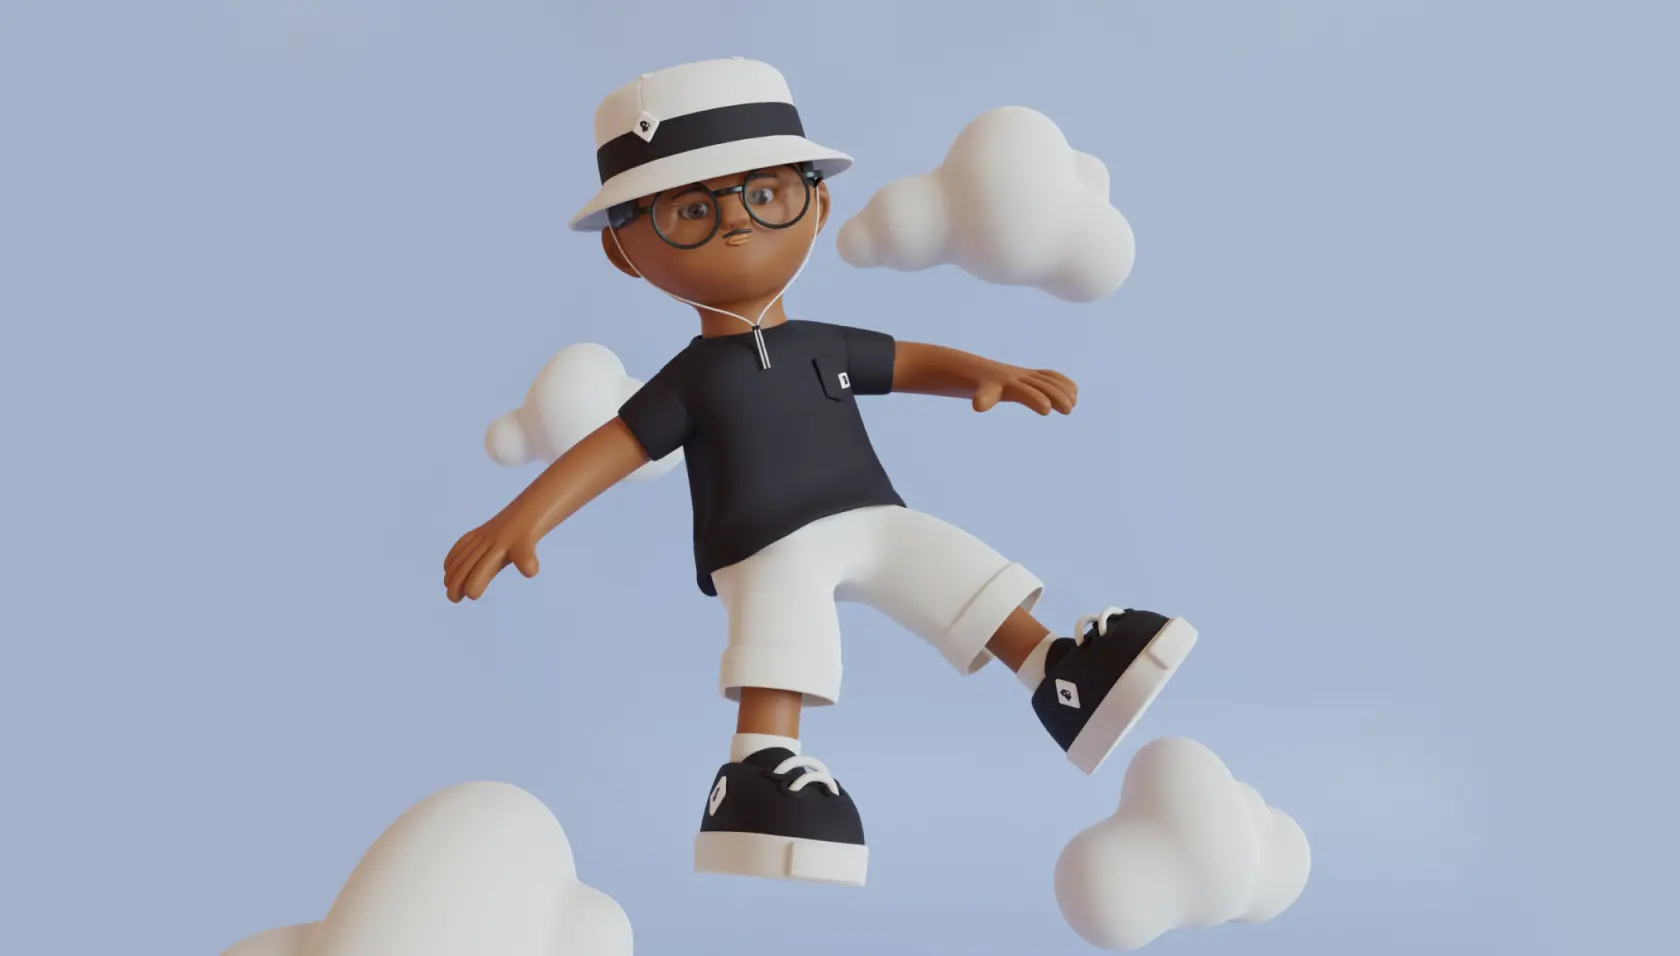 3D-rendered figure with glasses and hat walking on clouds, sporting a black shirt, white shorts, and black shoes.